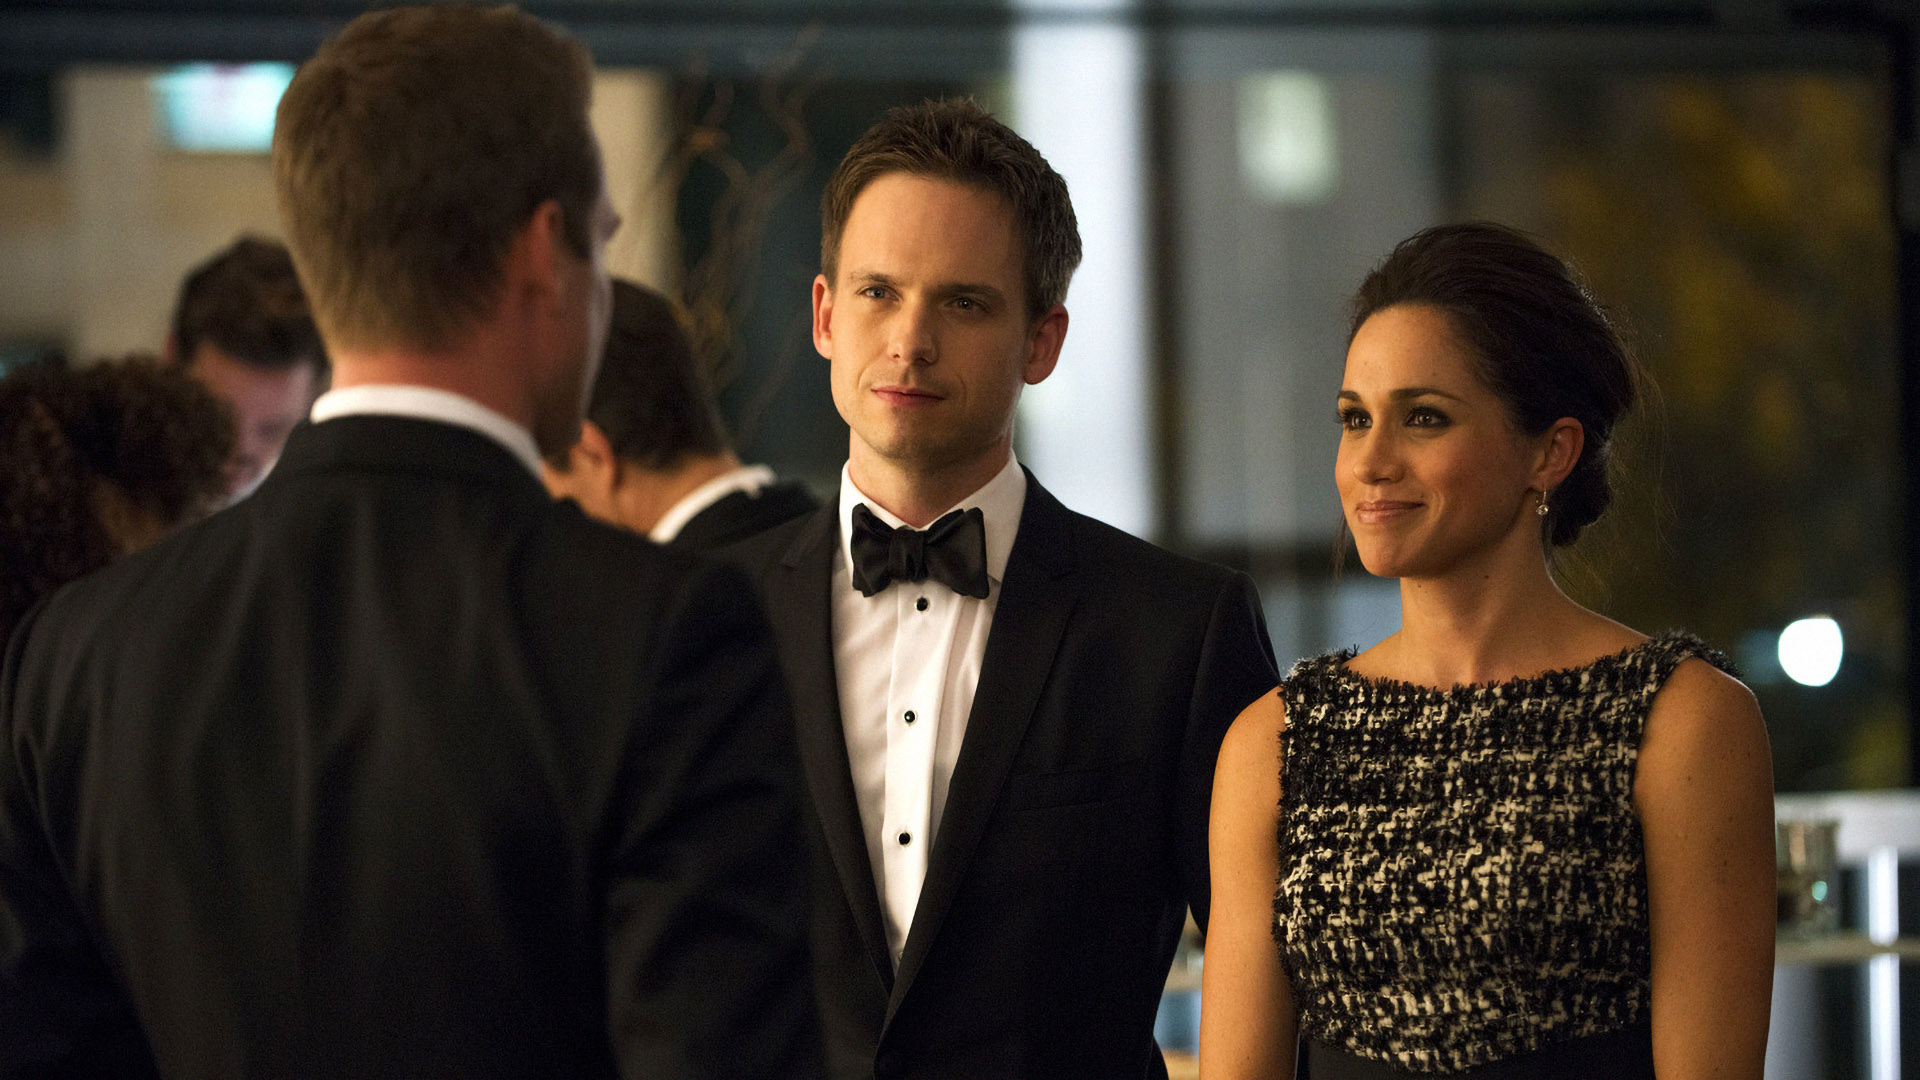 5 Reasons to Watch Suits While It's Still on Netflix